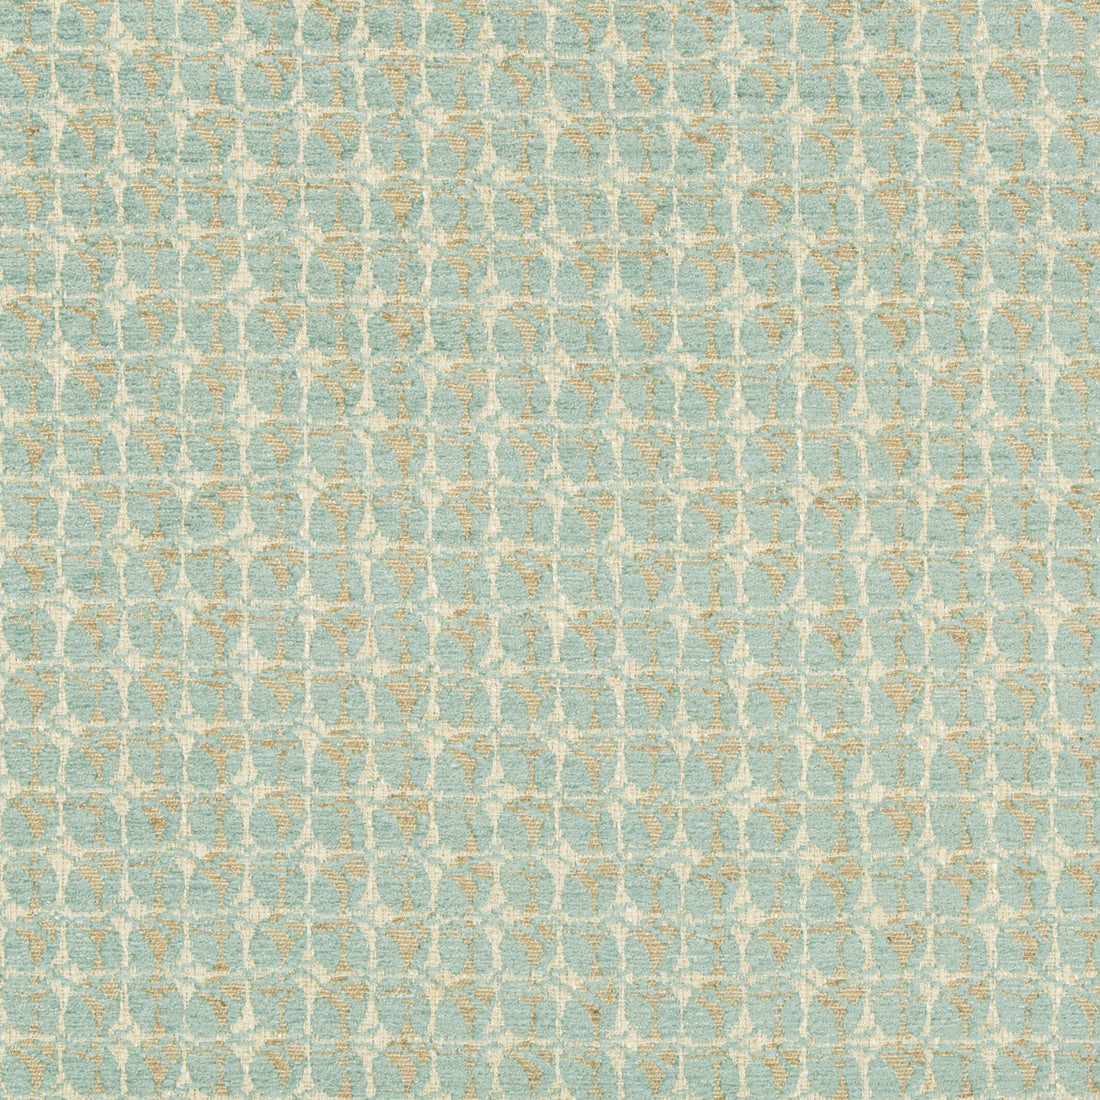 Jasper Weave fabric in aqua color - pattern GWF-3749.13.0 - by Lee Jofa Modern in the Gems collection